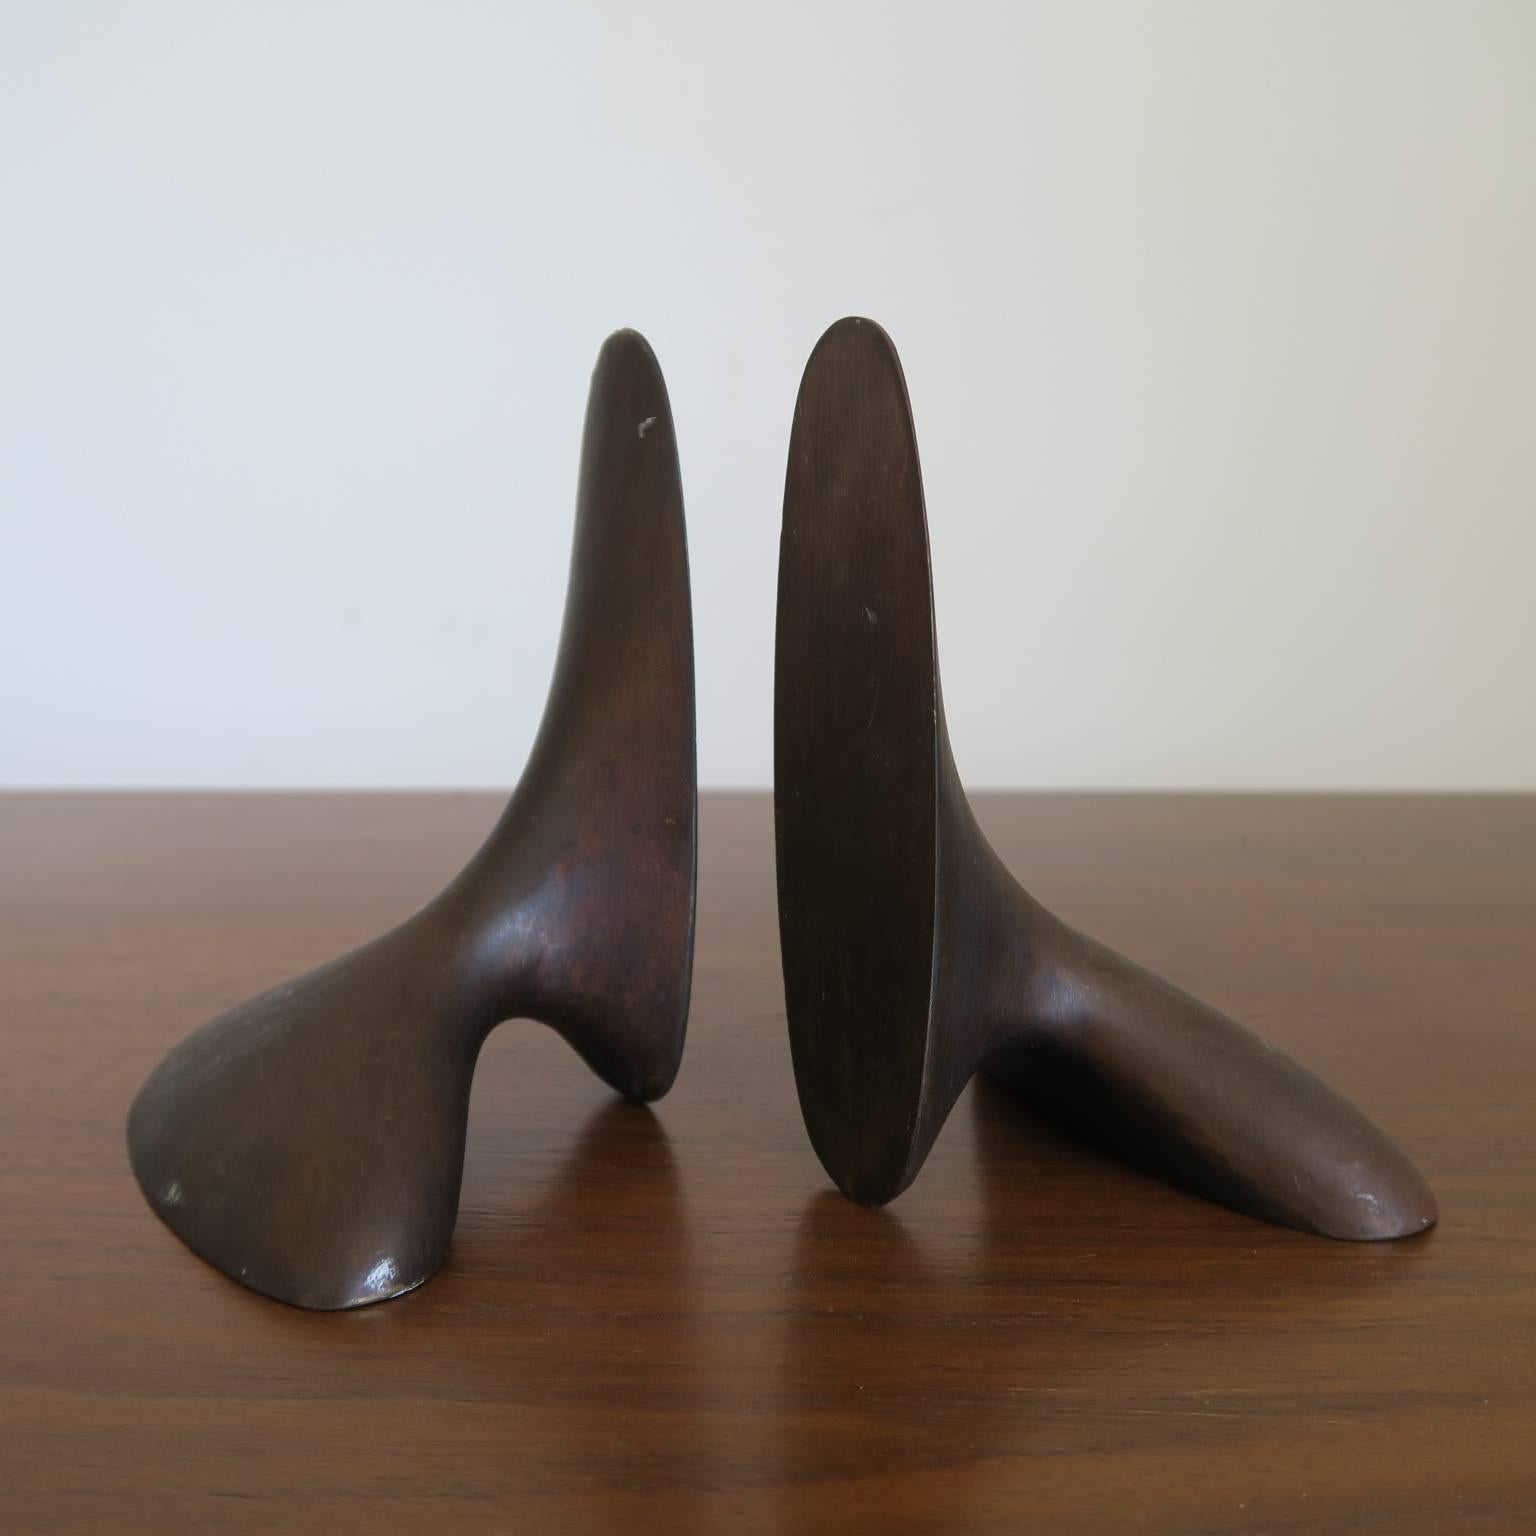 Exceptional early 1960s vintage pair of Carl Auböck designed solid bronze objects for use as bookends, paperweights or abstract decorative sculptures, Werkstätte Auböck, Austria, signed with impressed 'Auböck MADE IN AUSTRIA' mark and '02' to